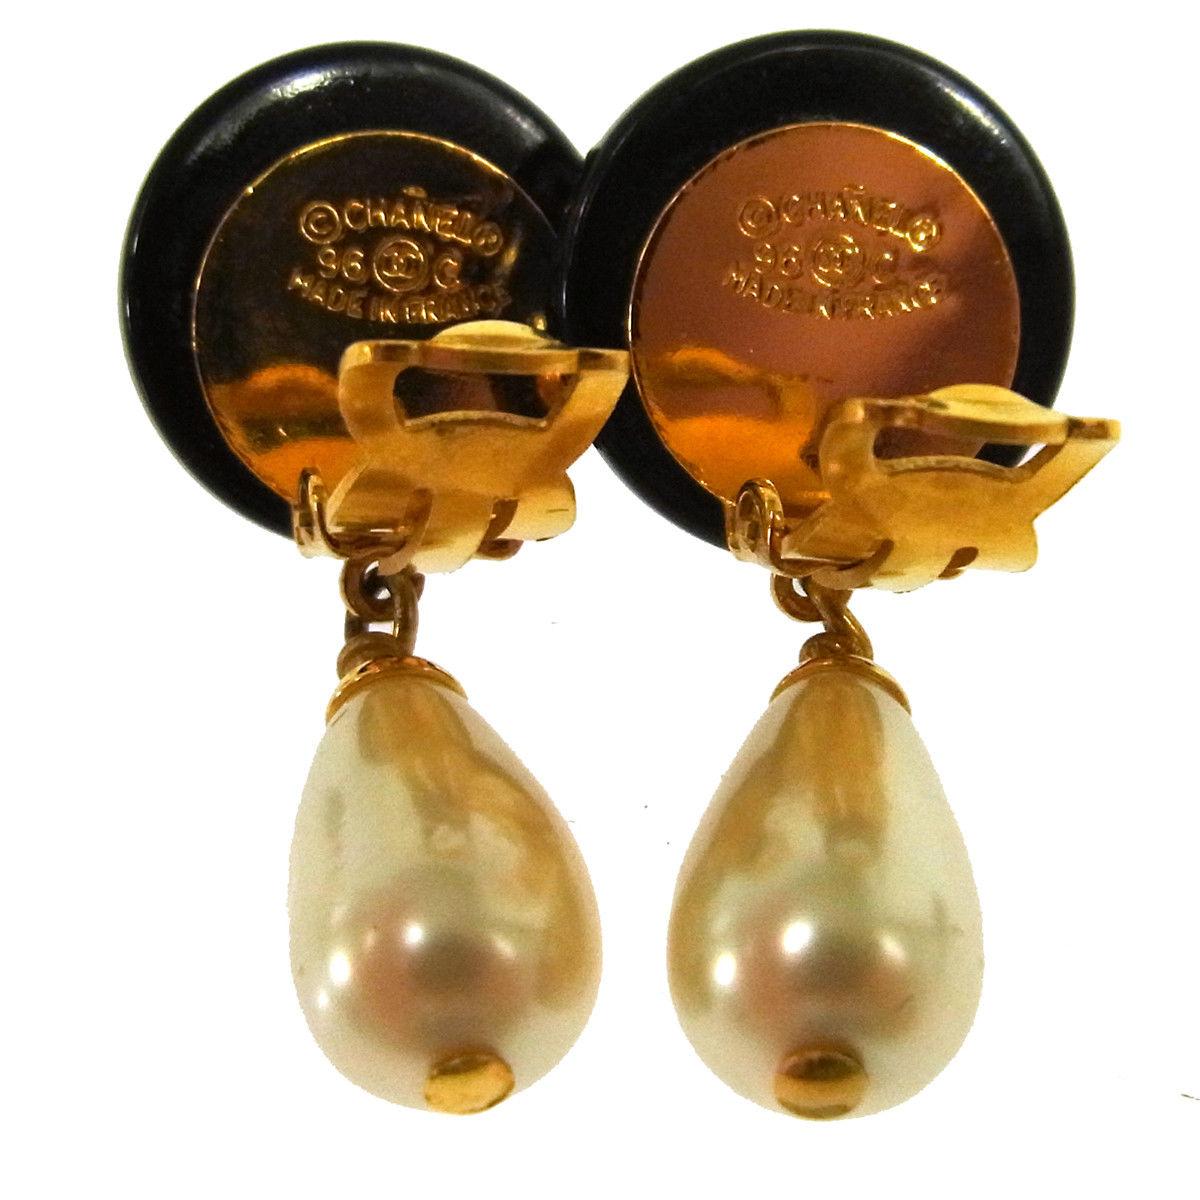 Chanel Studded CC Charm Pearl Black Evening Dangle Drop Earrings in Box

Metal
Resin
Faux pearl
Gold tone
Clip on closure
Made in France
Width 0.50